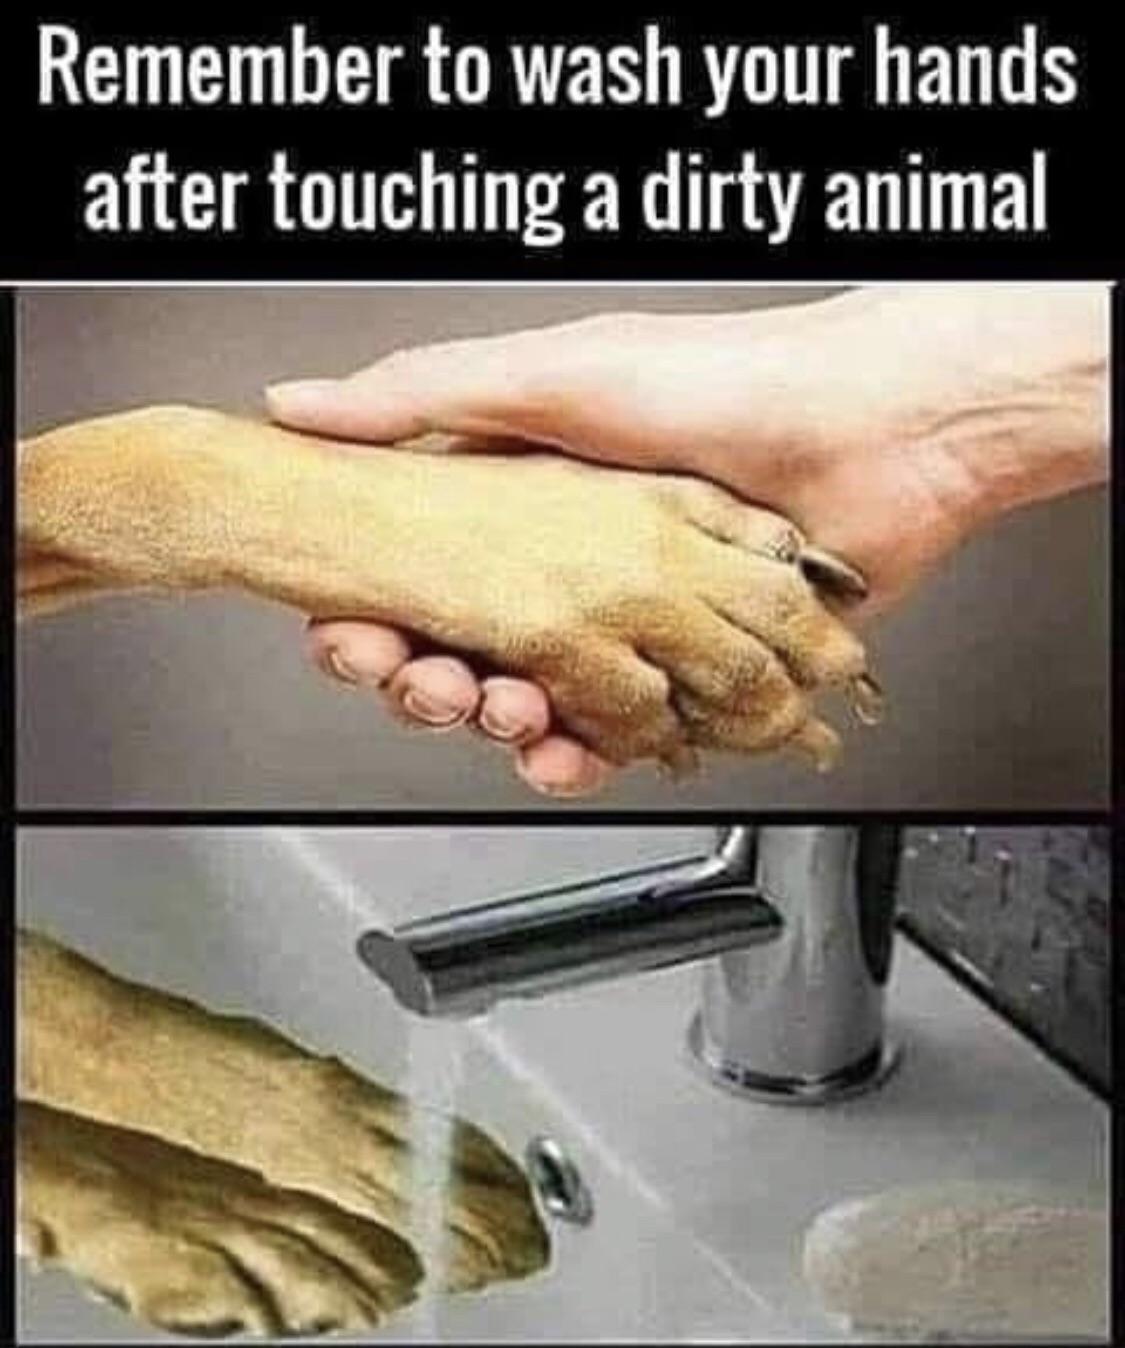 remember to wash your hands after touching a dirty - Remember to wash your hands after touching a dirty animal